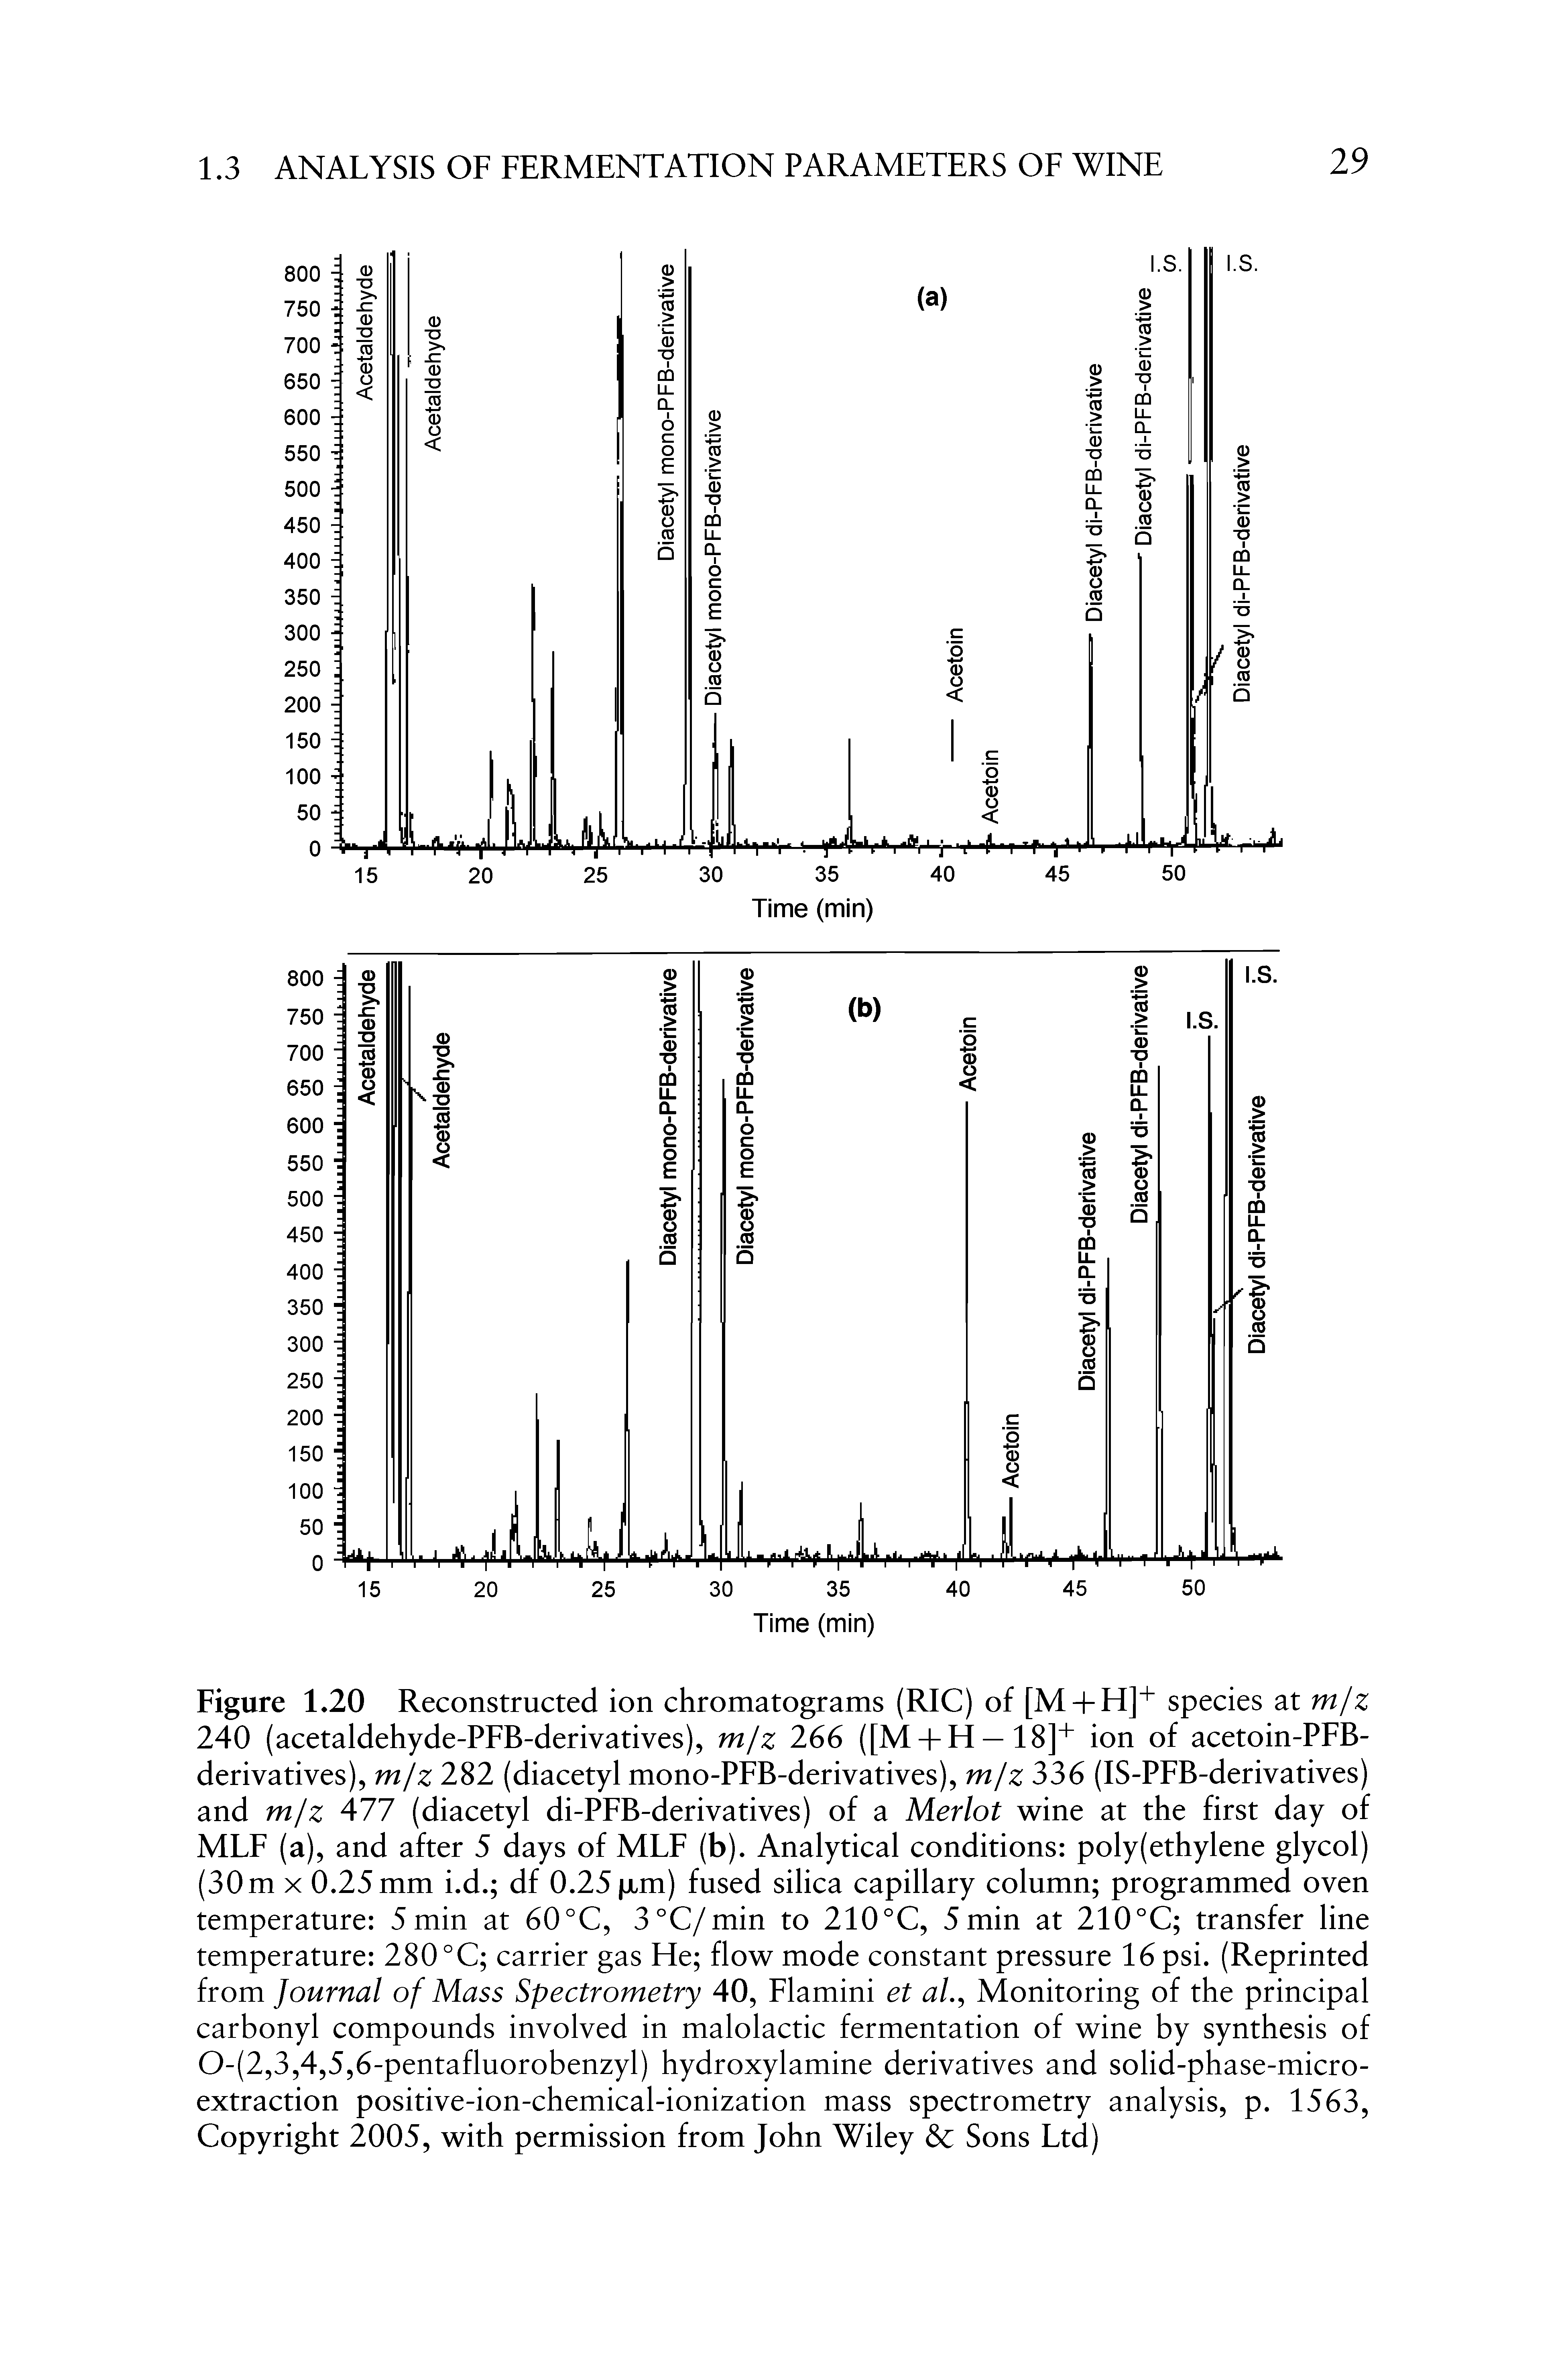 Figure 1.20 Reconstructed ion chromatograms (RIC) of [M + H]+ species at m/z 240 (acetaldehyde-PFB-derivatives), m/z 266 ([M + H —18]+ ion of acetoin-PFB-derivatives), m/z 282 (diacetyl mono-PFB-derivatives), m/z 336 (IS-PFB-derivatives) and m/z 477 (diacetyl di-PFB-derivatives) of a Merlot wine at the first day of MLF (a), and after 5 days of MLF (b). Analytical conditions polyethylene glycol) (30m x 0.25 mm i.d. df 0.25 juim) fused silica capillary column programmed oven temperature 5 min at 60 °C, 3°C/min to 210 °C, 5 min at 210°C transfer line temperature 280 °C carrier gas He flow mode constant pressure 16psi. (Reprinted from Journal of Mass Spectrometry 40, Flamini et al., Monitoring of the principal carbonyl compounds involved in malolactic fermentation of wine by synthesis of 0-(2,3,4,5,6-pentafluorobenzyl) hydroxylamine derivatives and solid-phase-microextraction positive-ion-chemical-ionization mass spectrometry analysis, p. 1563, Copyright 2005, with permission from John Wiley Sons Ltd)...